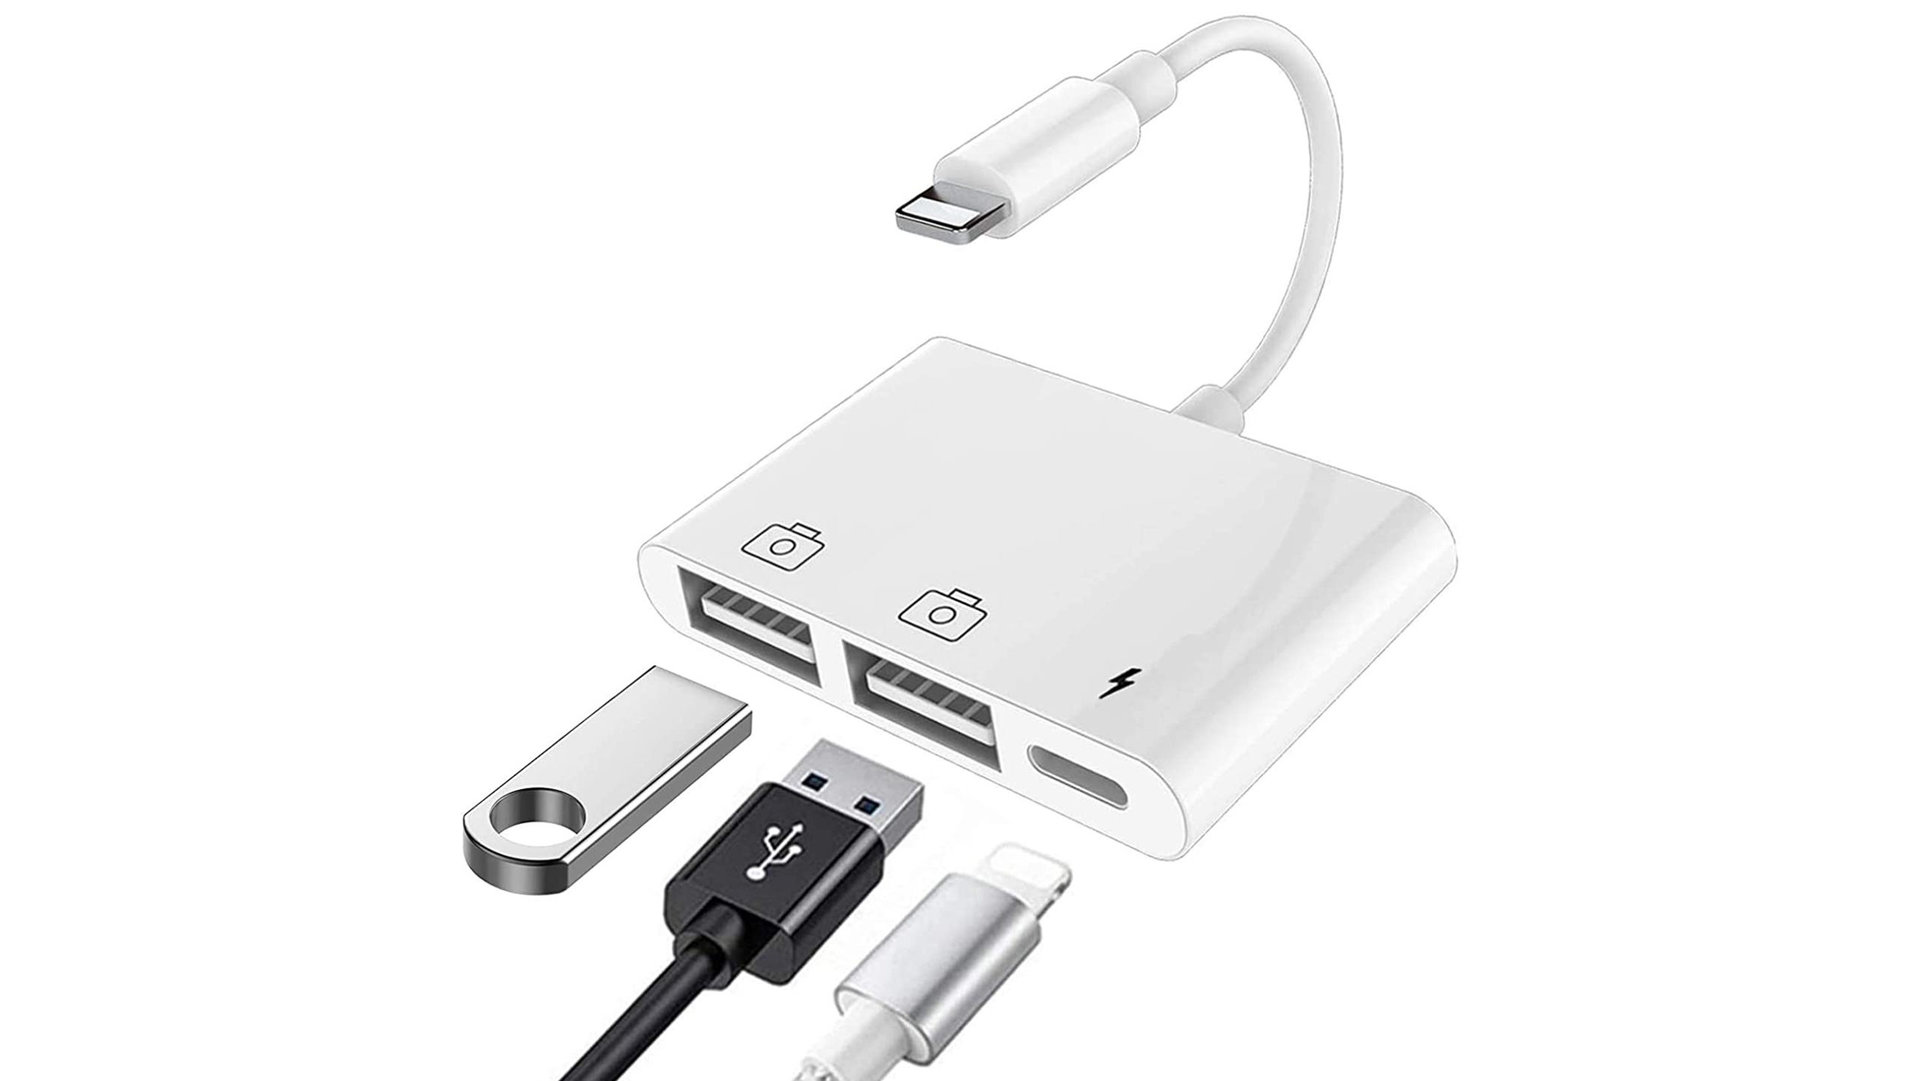 Covs Lightning to USB Dual Adapter - iPhone dongles